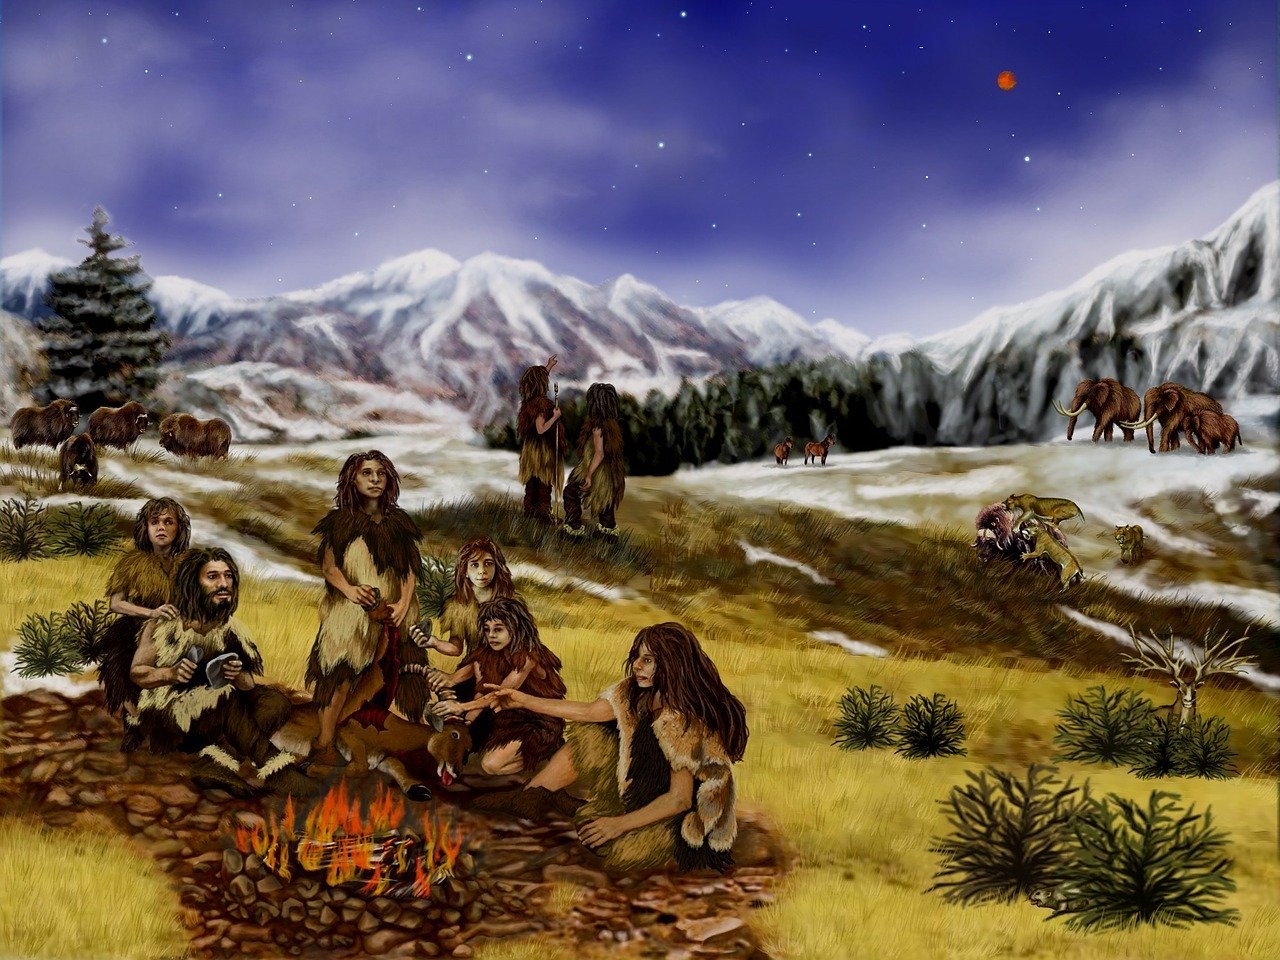 Neanderthals faced climate change too - How did they cope?